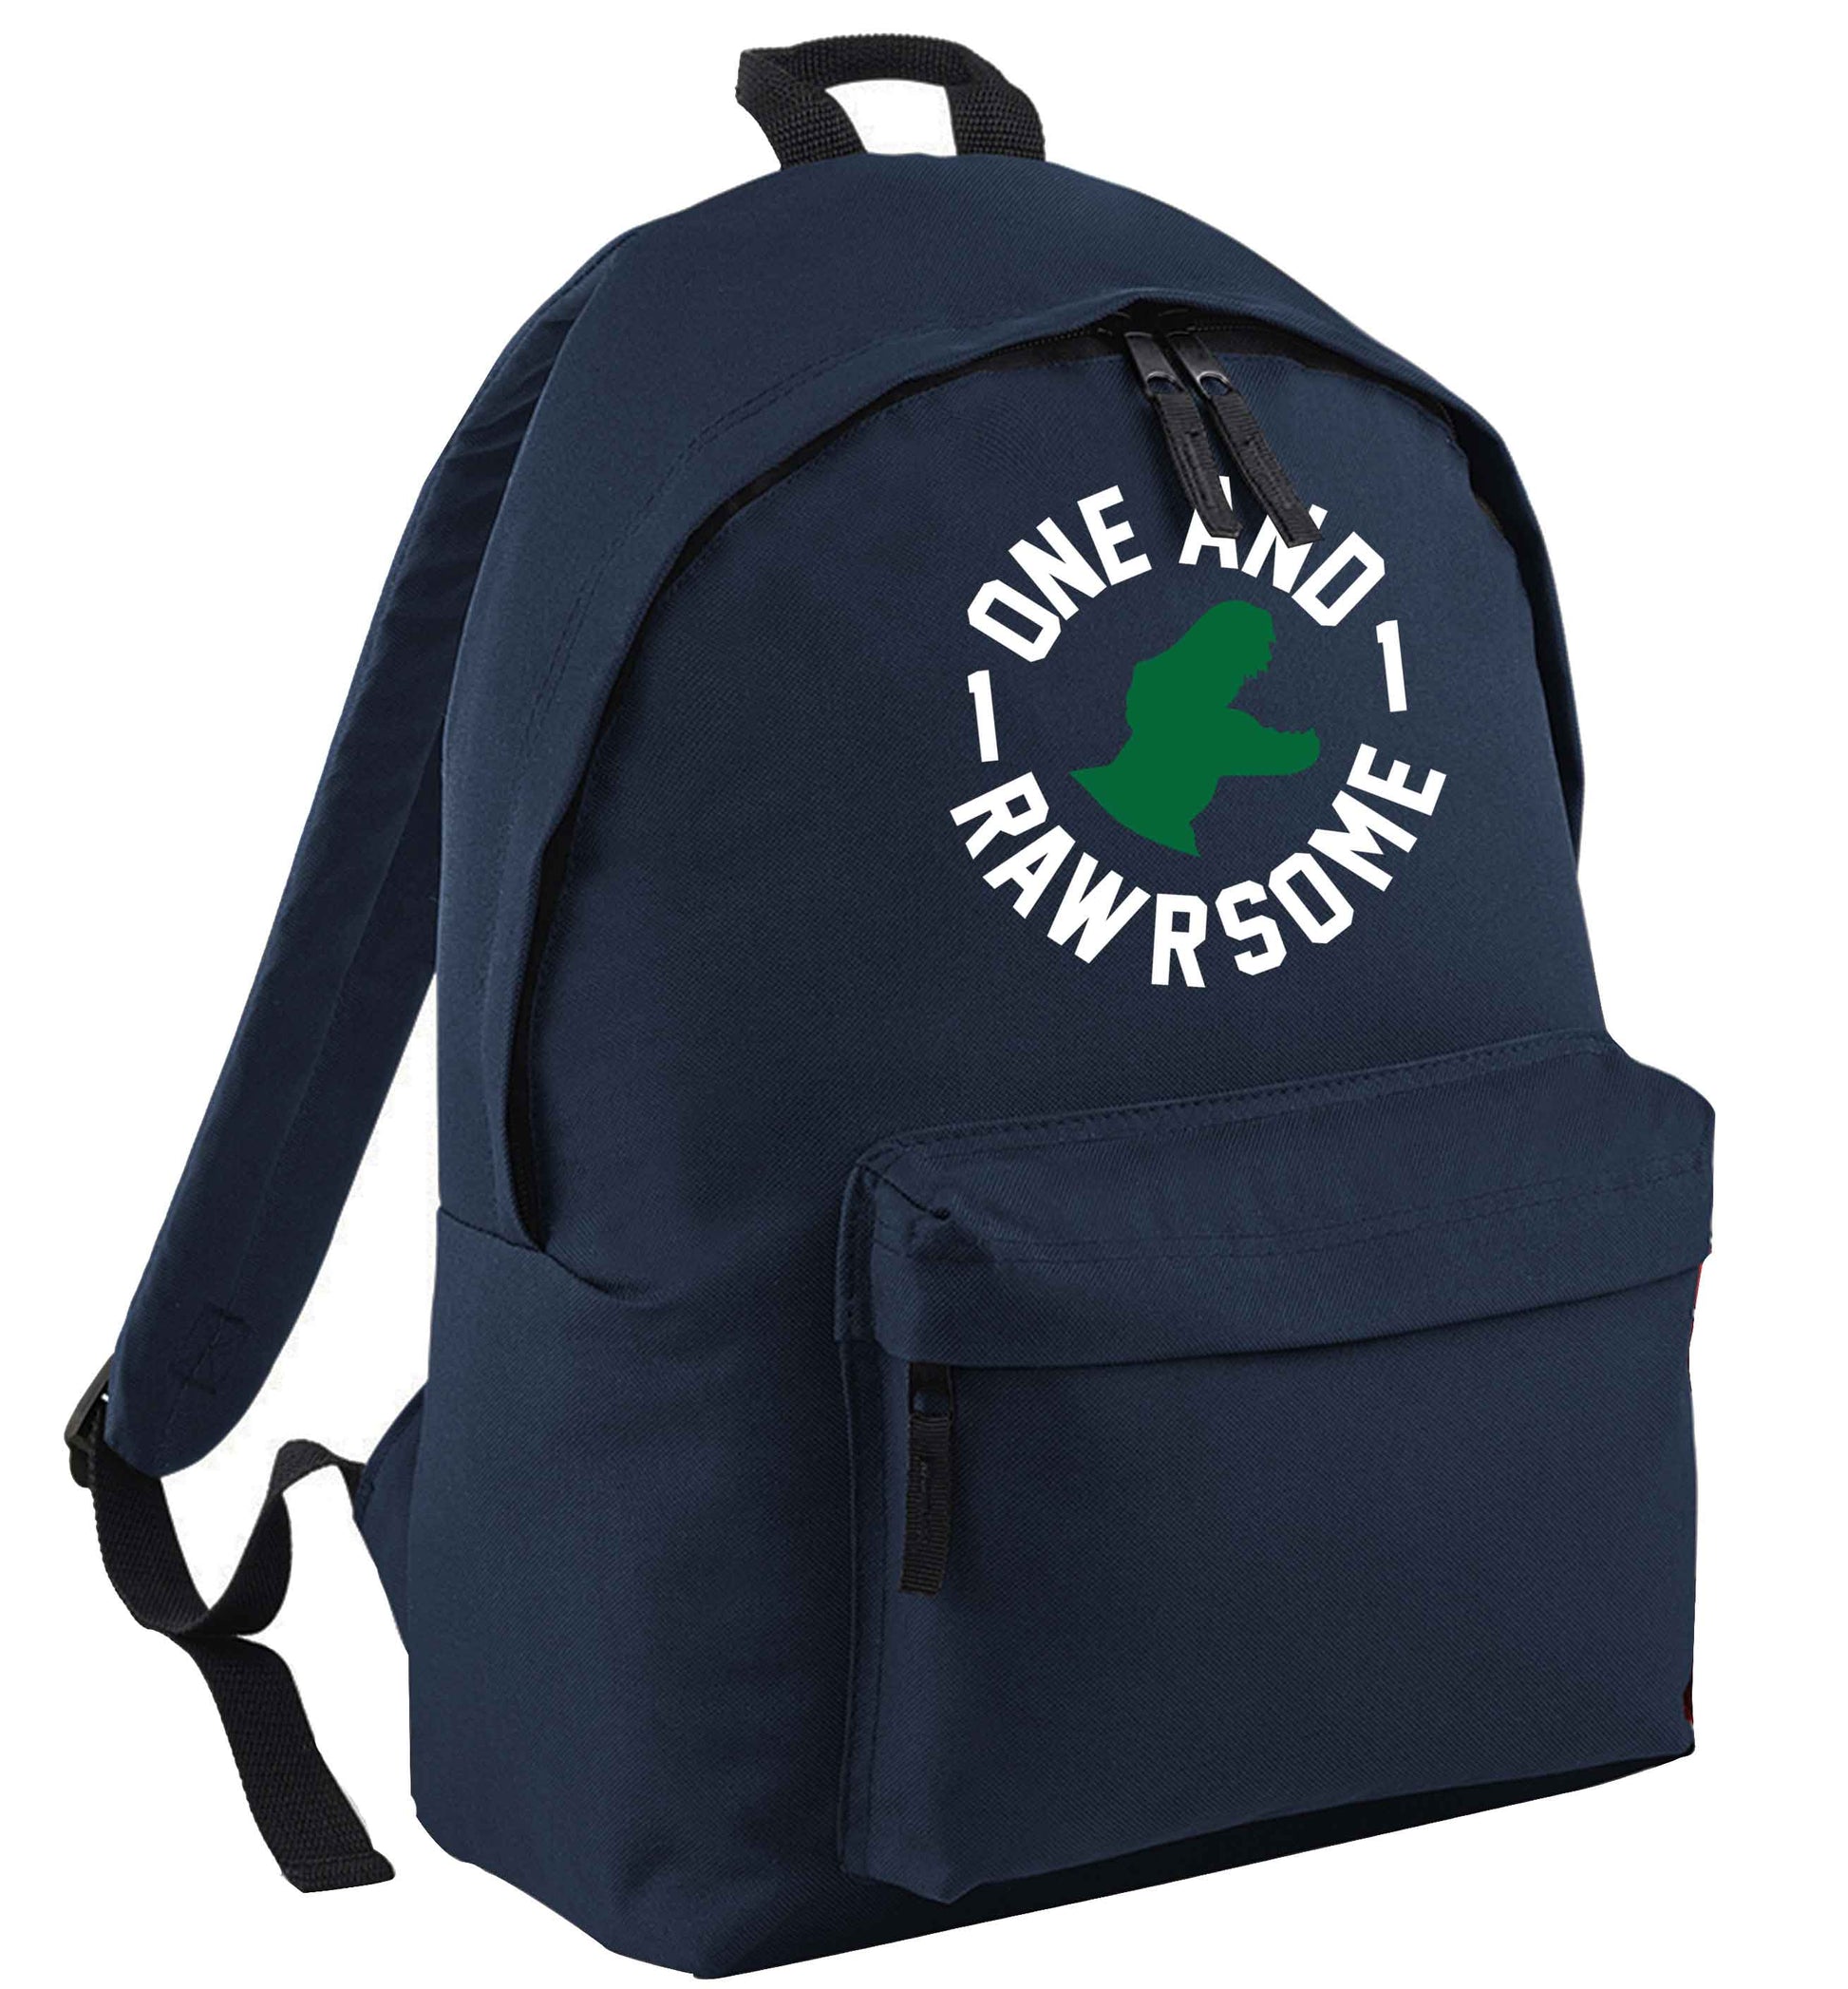 One and Rawrsome navy adults backpack